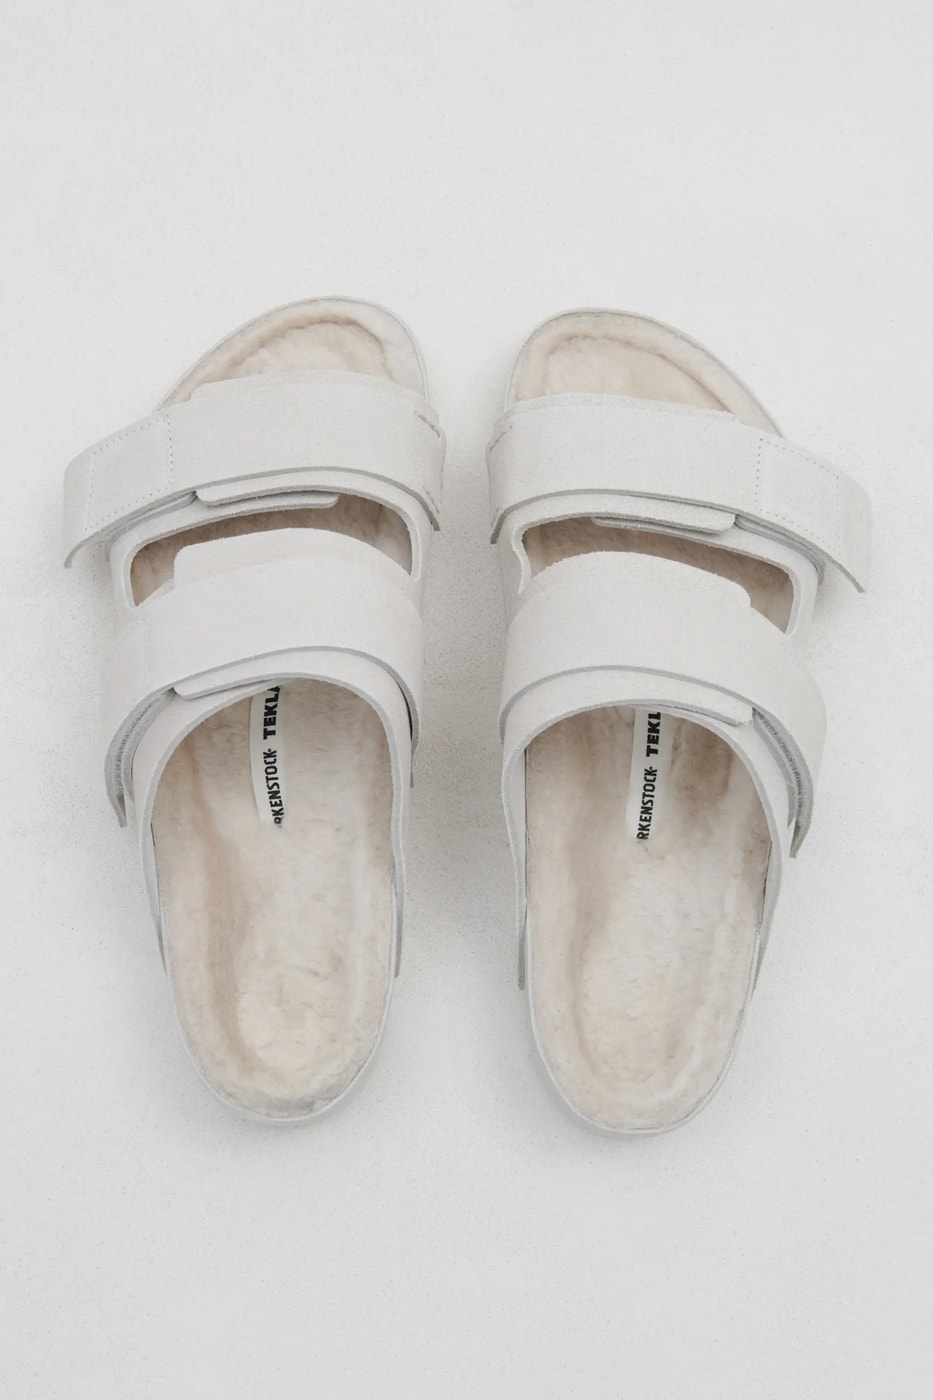 Birkenstock and Tekla Come Together for a Limited Edition Collection of Footwear and Sleepwear tekla fabrics sandals slippers collaboration sherpa stripe pyjamas mules boston uji nagoya 